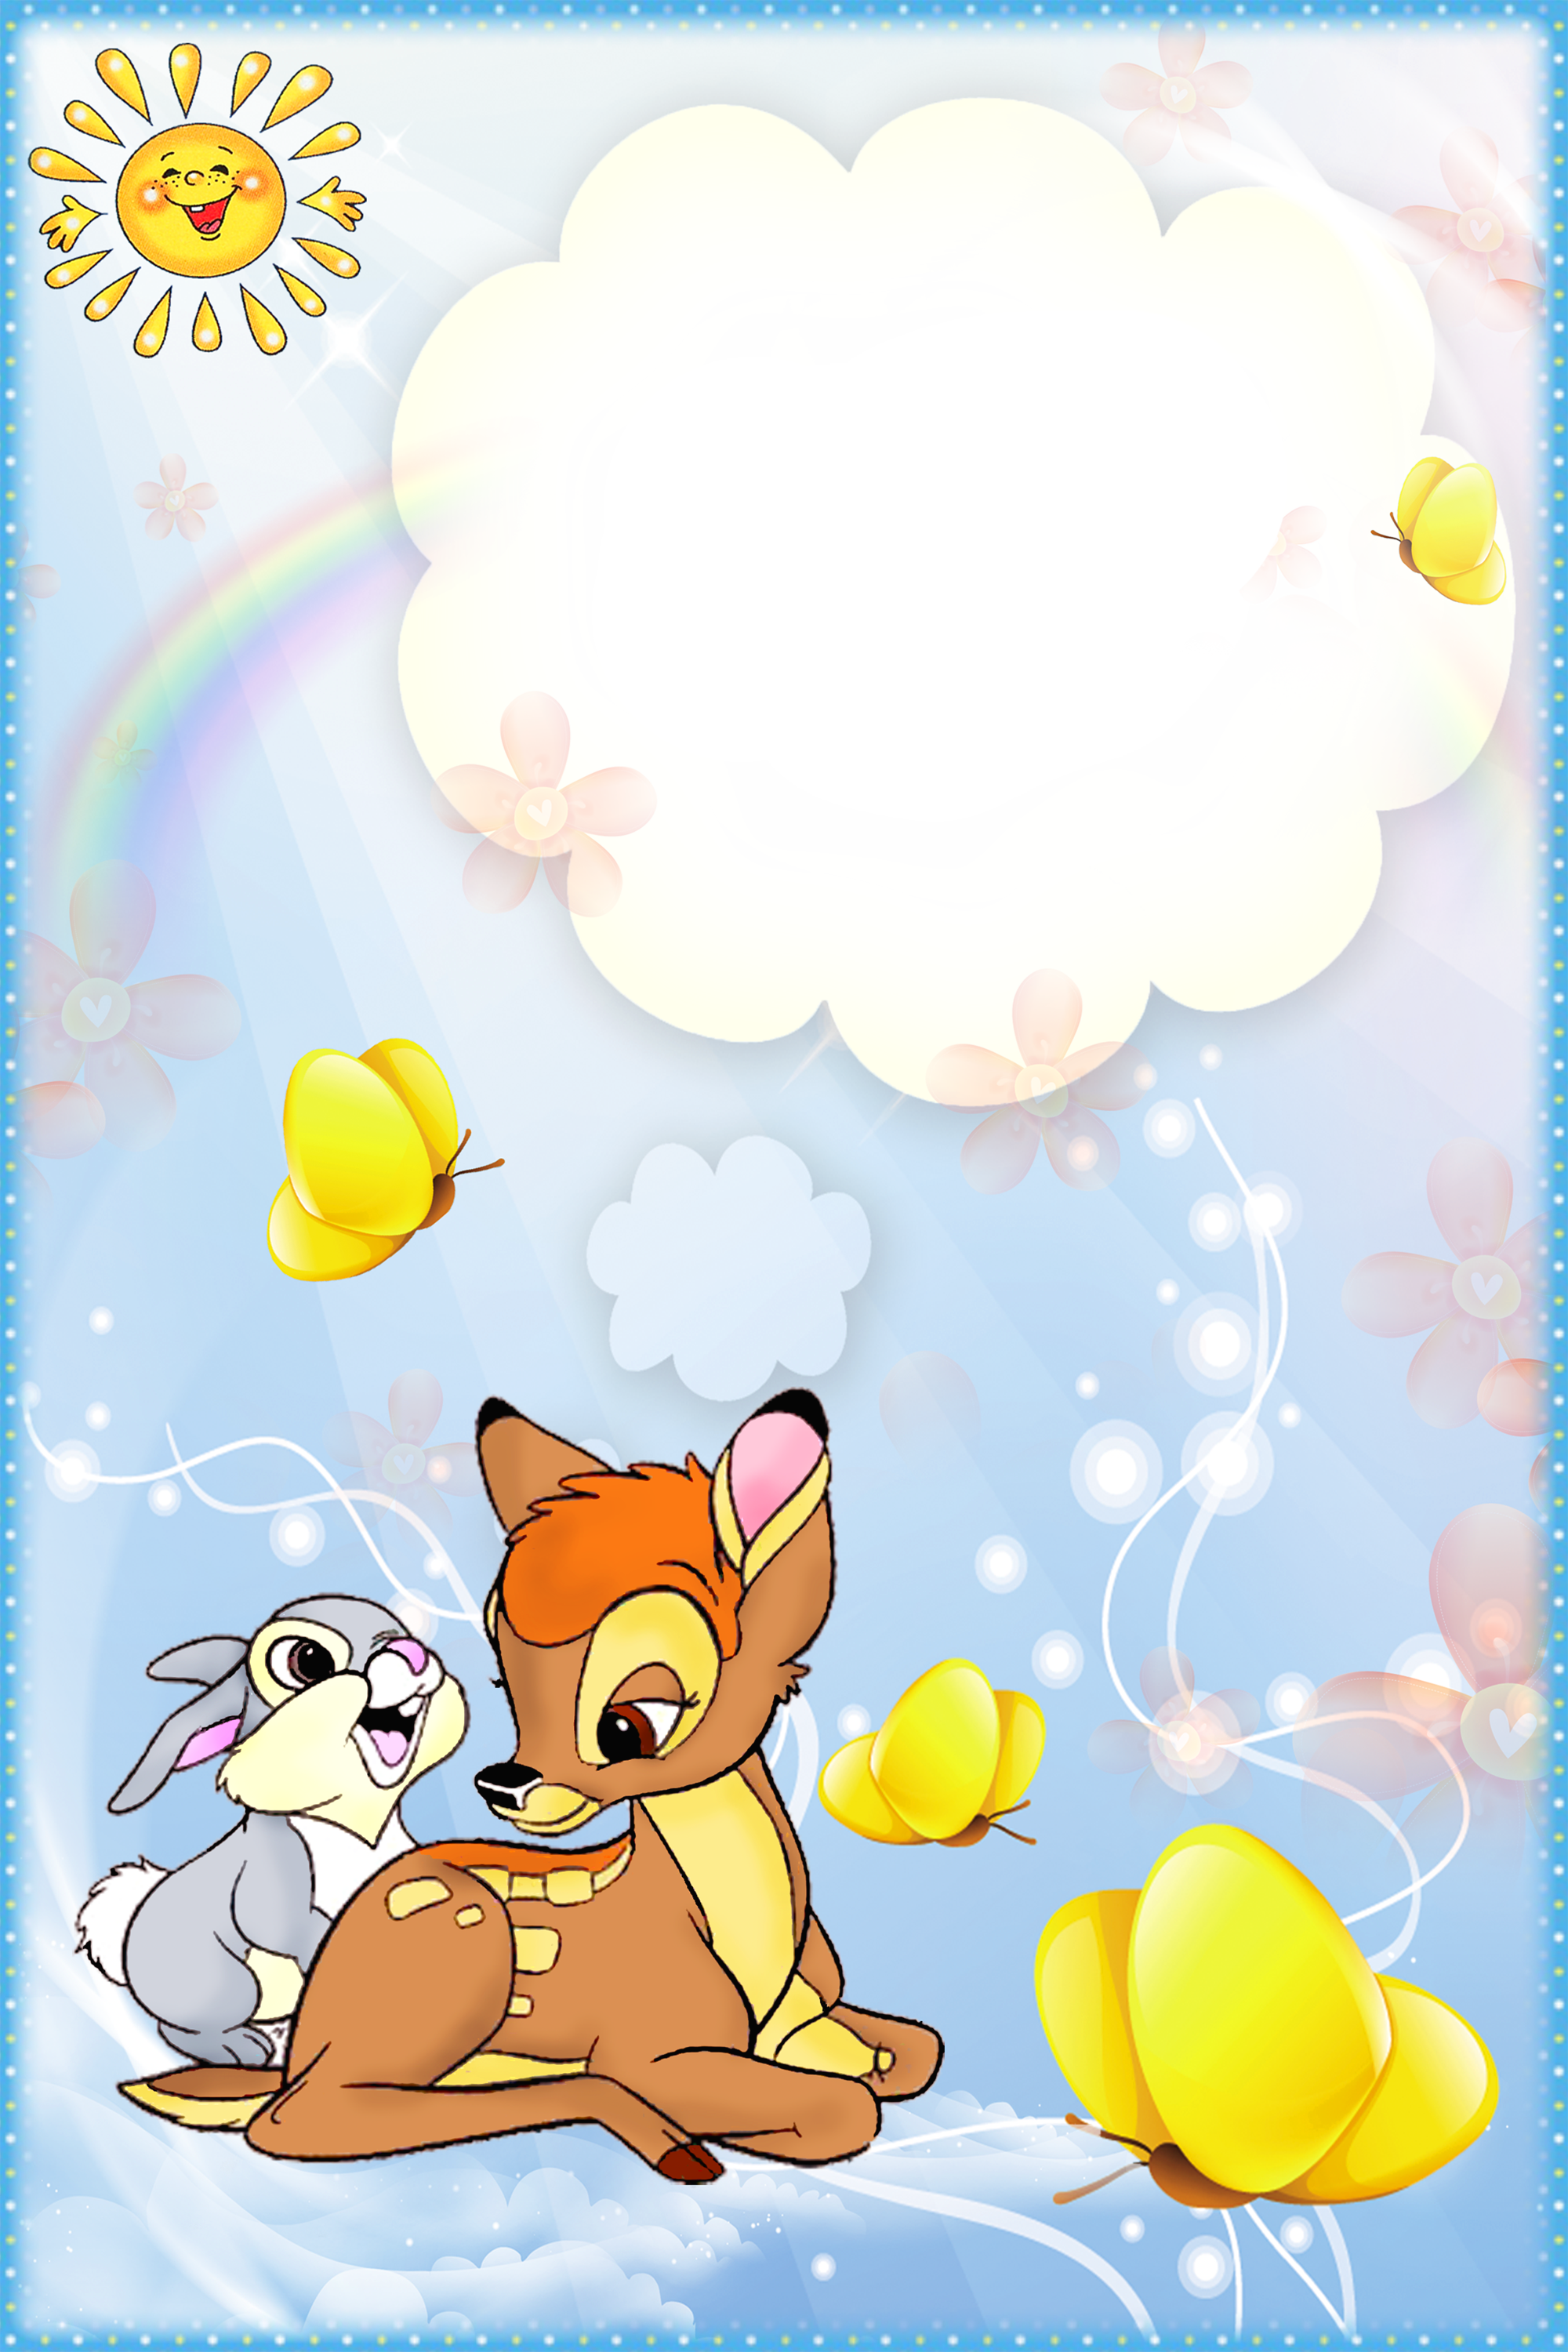 Kids Transparent PNG Frame with Rabbit and Deer | Gallery Yopriceville - High-Quality ...2000 x 3000